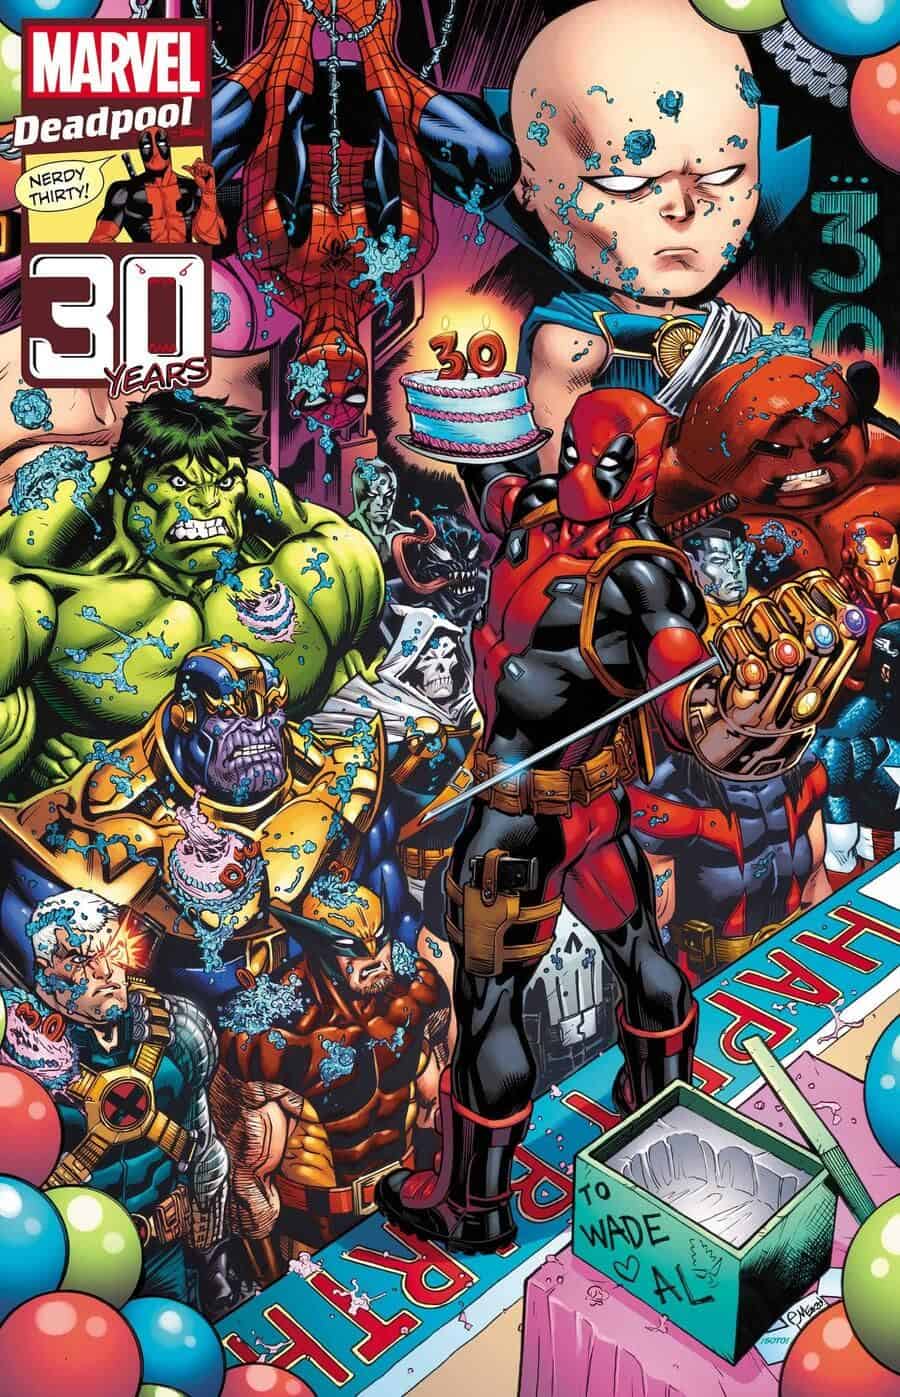 Marvel Comics & Deadpool Nerdy 30 #1 Spoilers: Rob Liefeld Brings Back A Fan Fave 3 Months Early?!